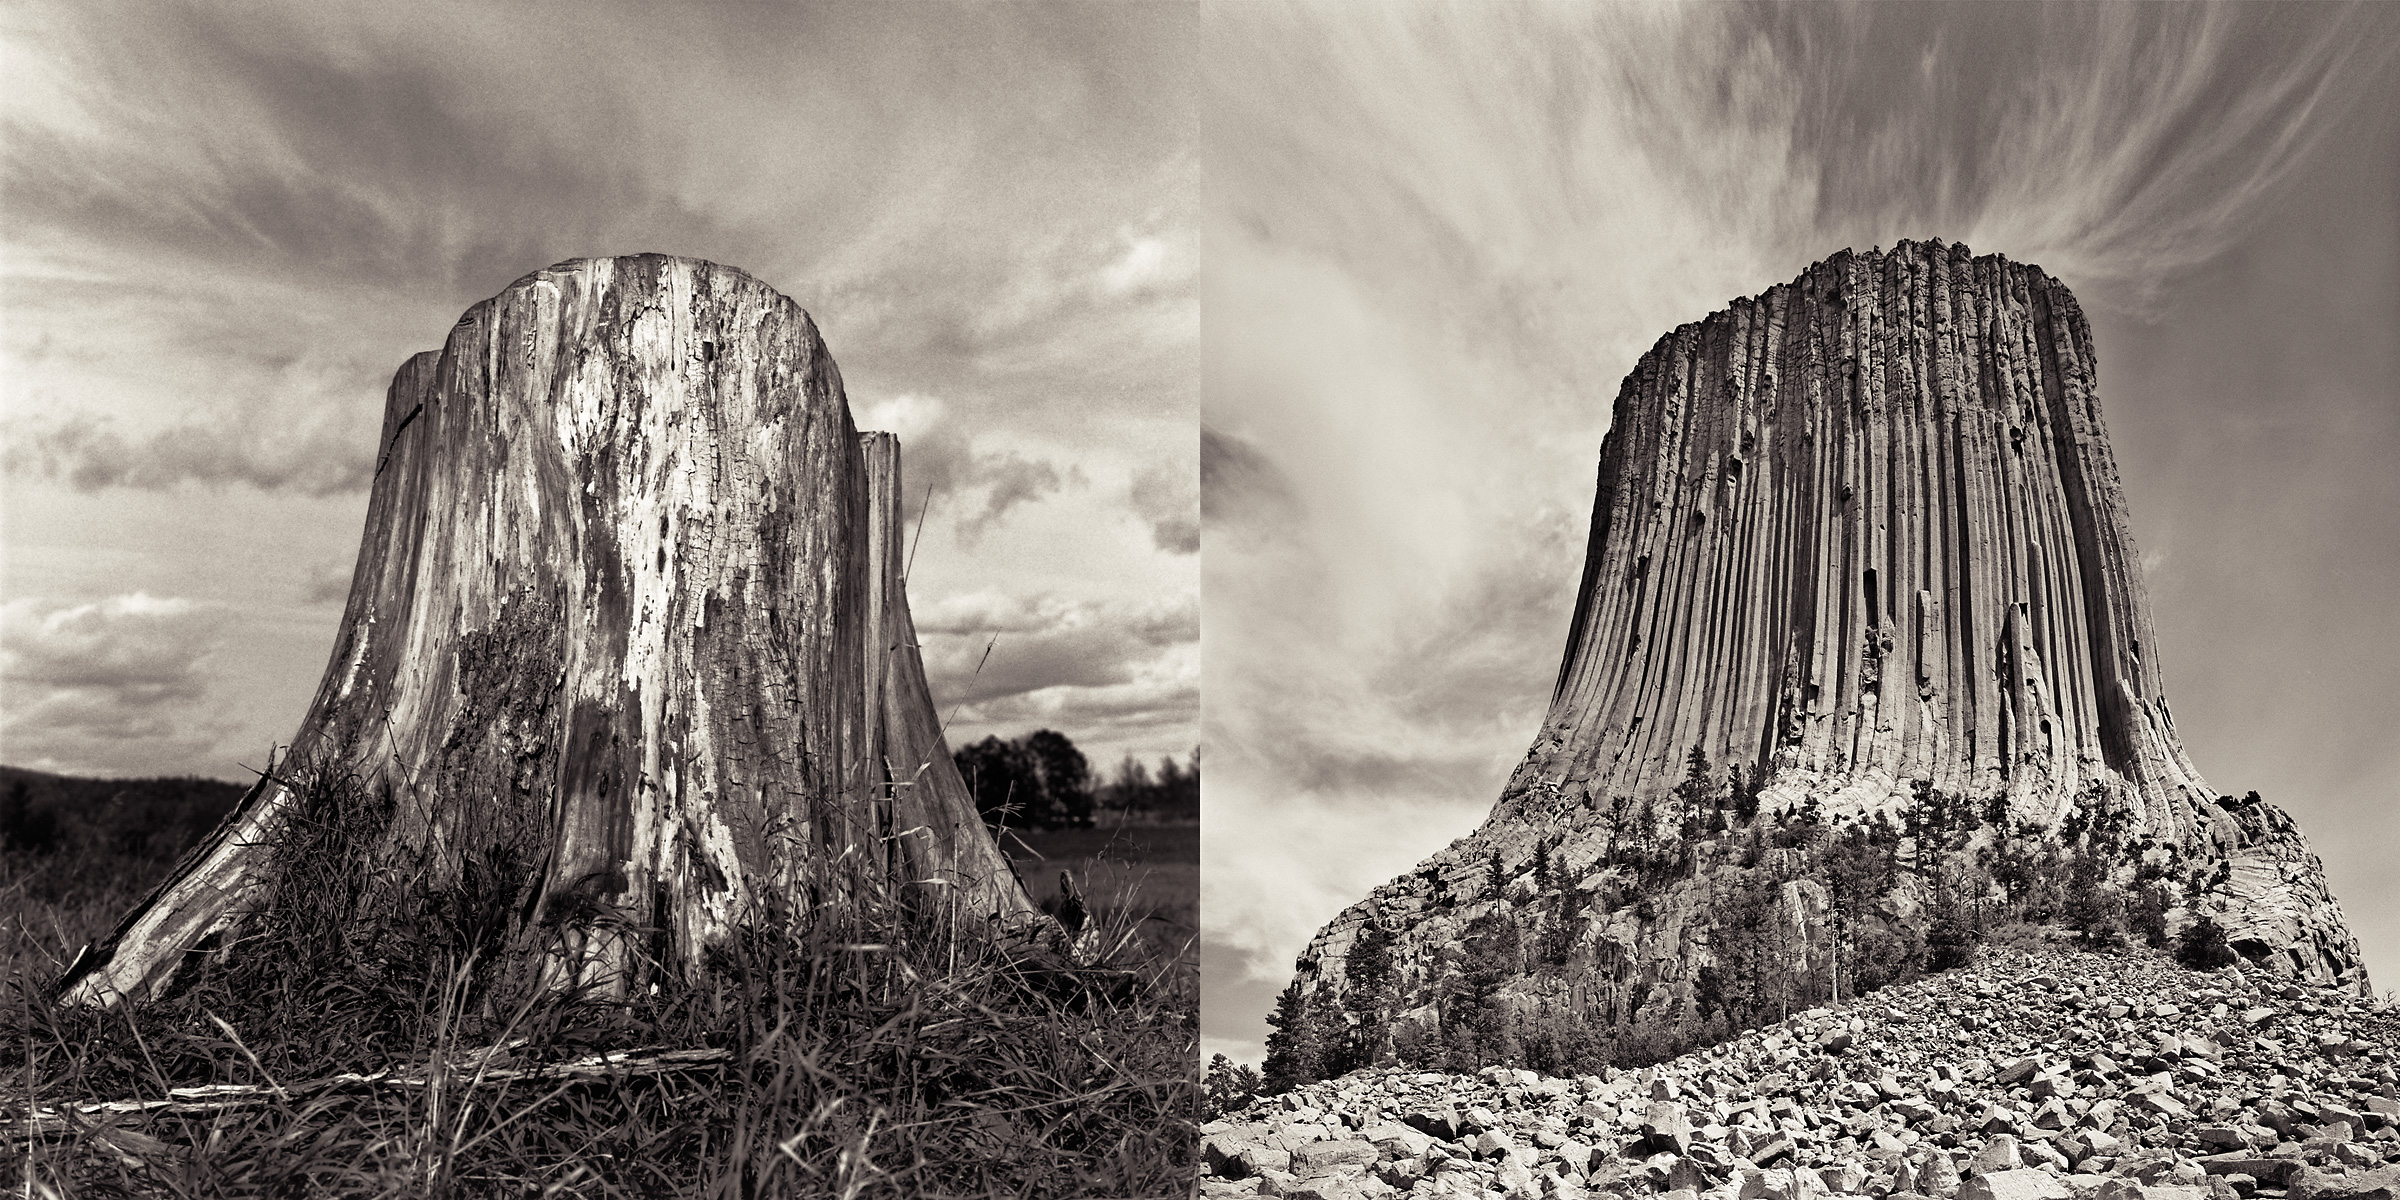 Stephen Austin Welch commercial director & advertising and fine art landscape photographer stump vs. devils tower B&W black and white sepia selenium duo-toned photography: moody and dramatic fine art photographs